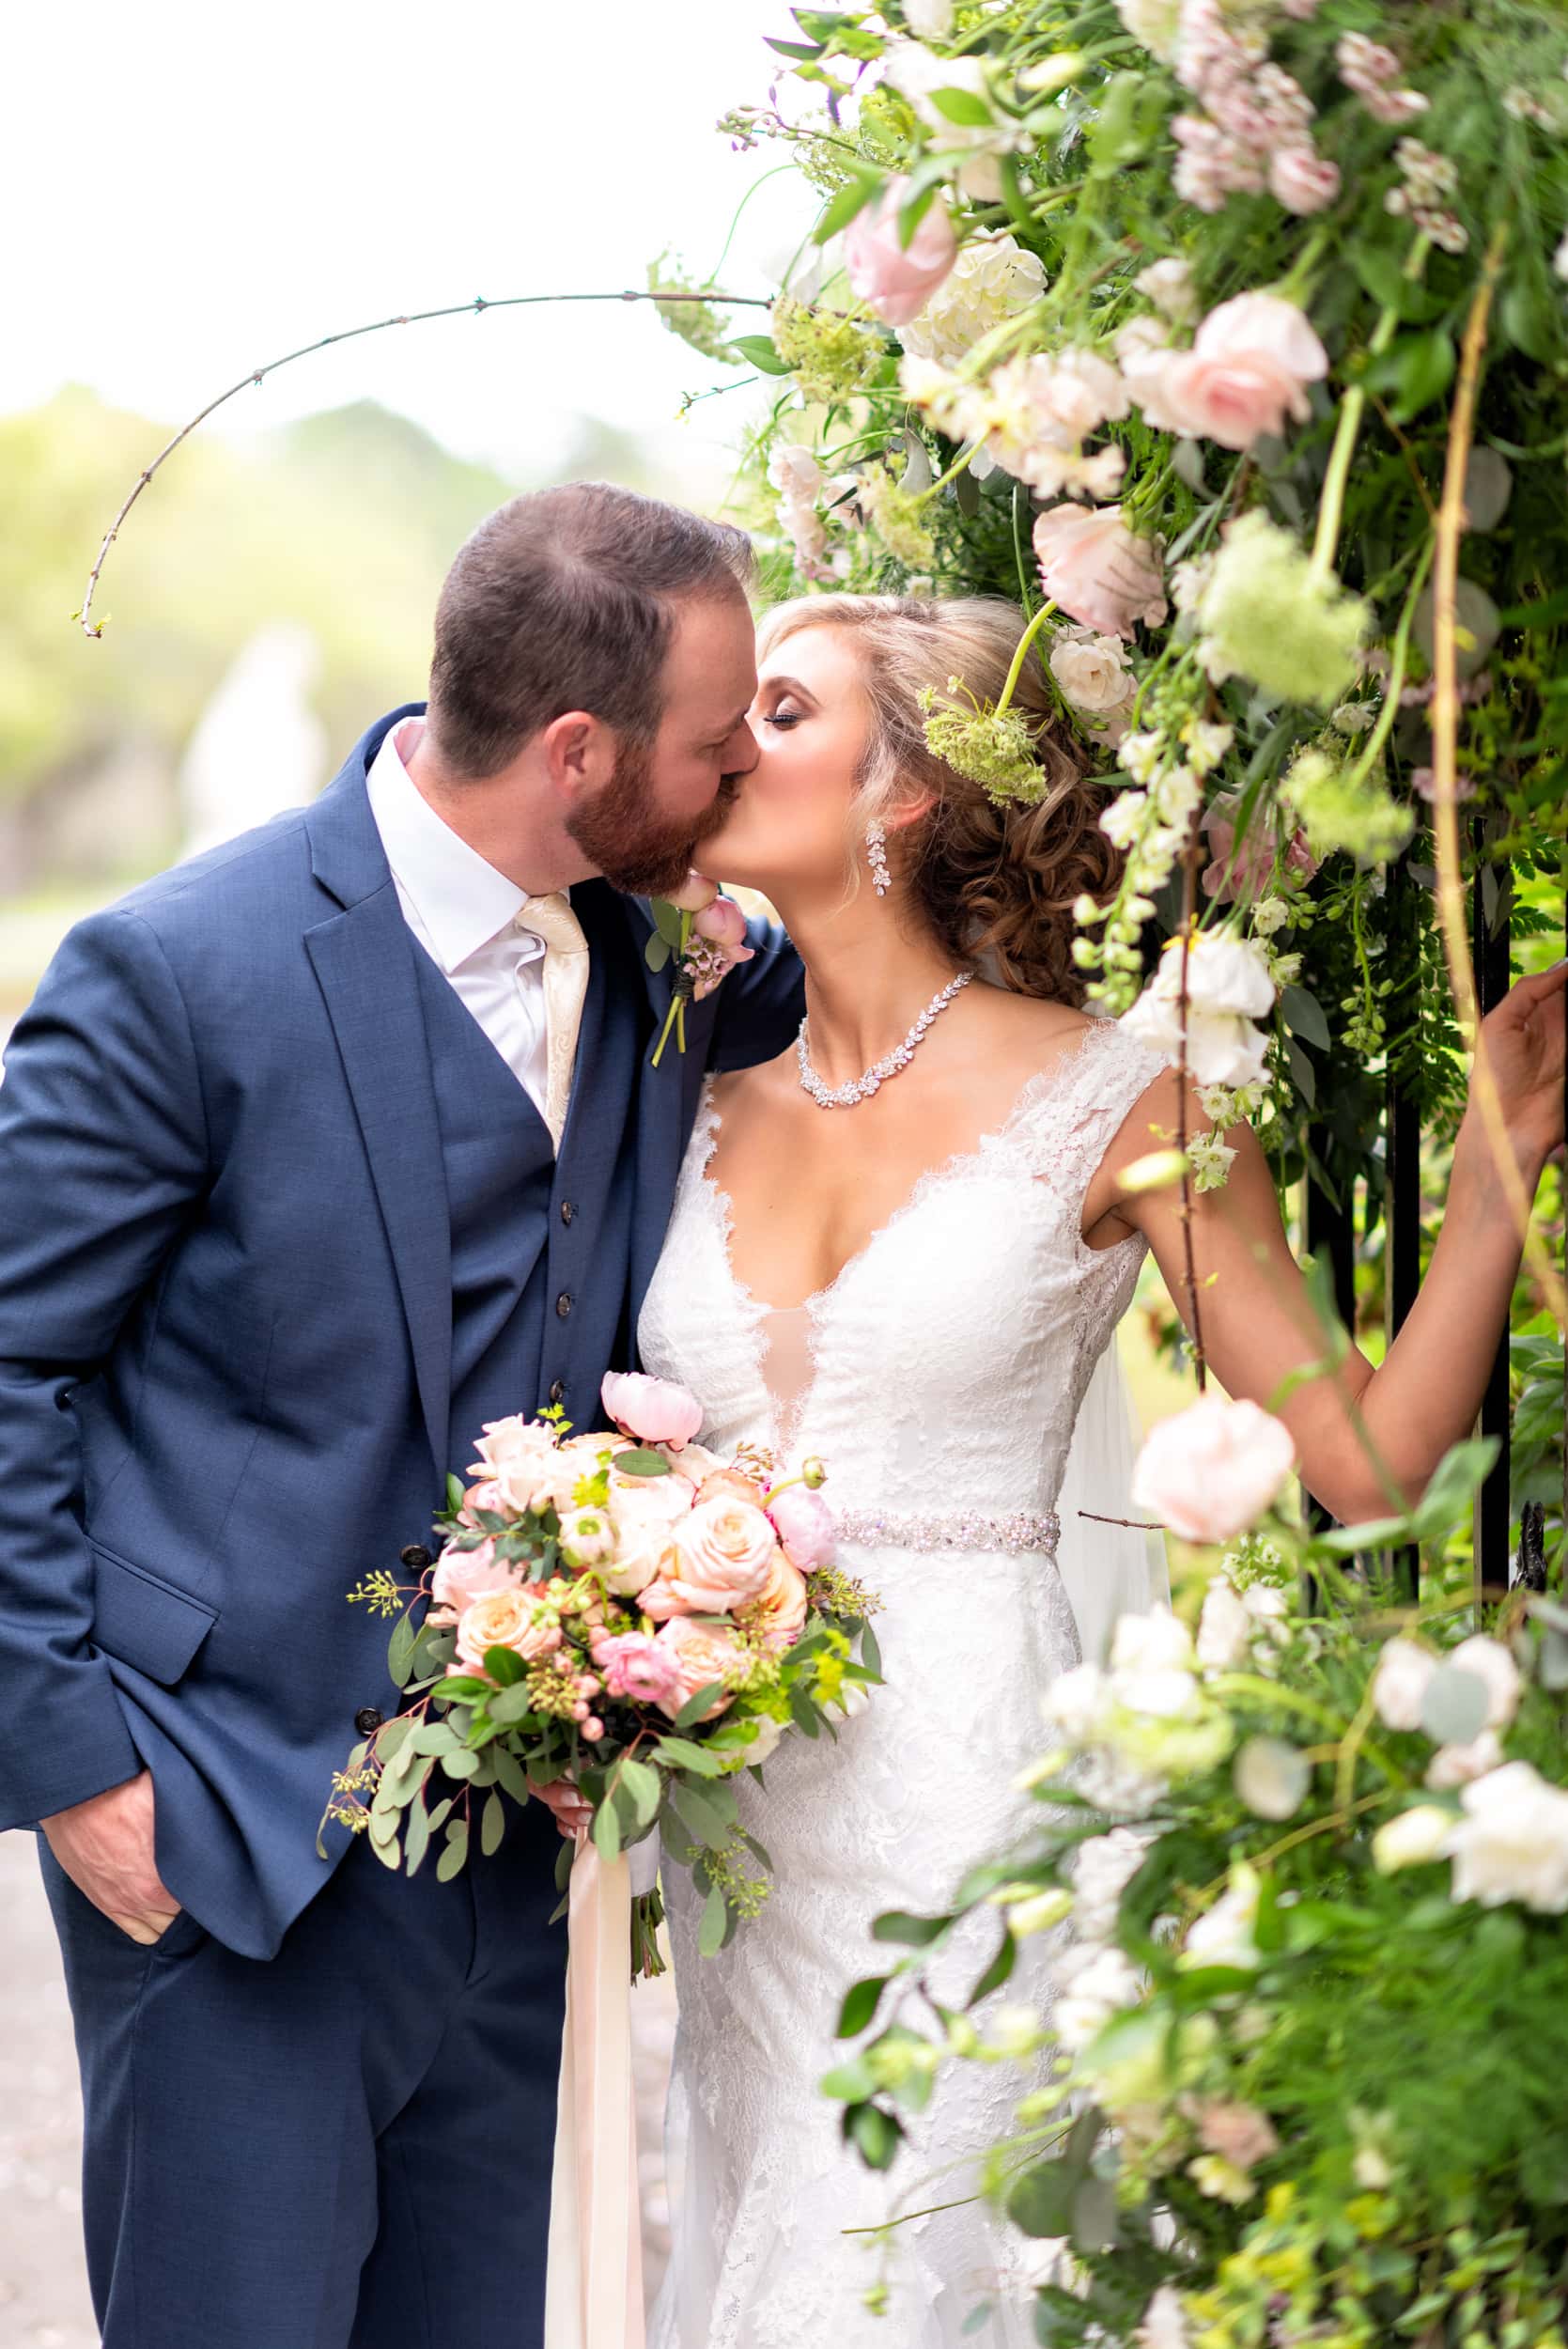 Kiss by the flowers on the gates - Brookgreen Gardens